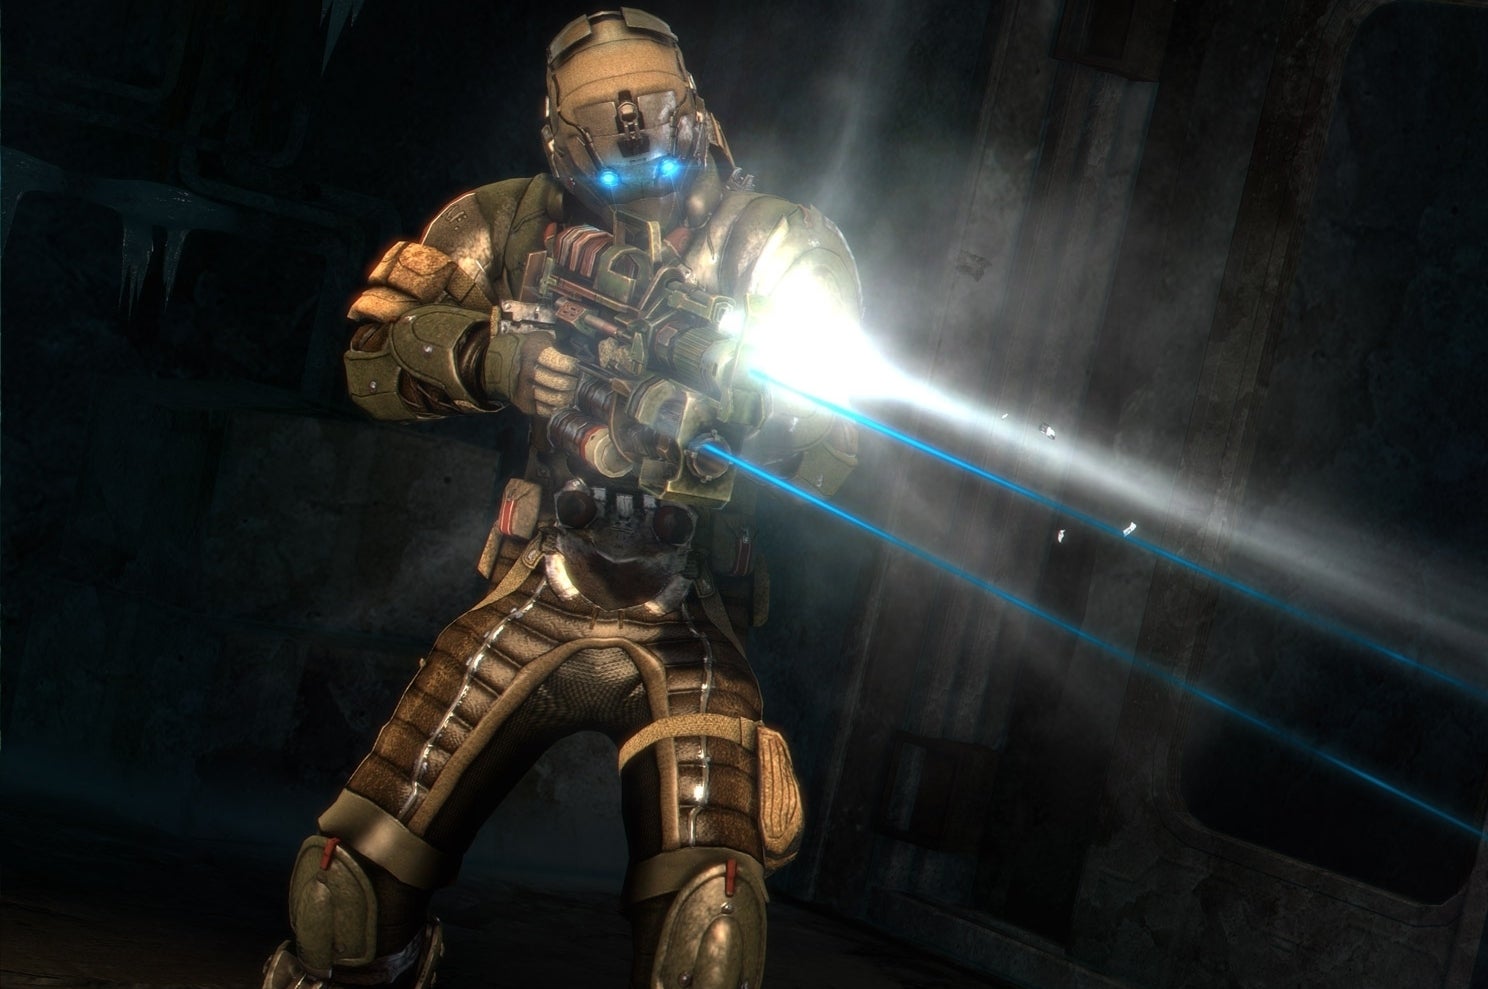 Image for EA has no intention of patching the Dead Space 3 loot exploit